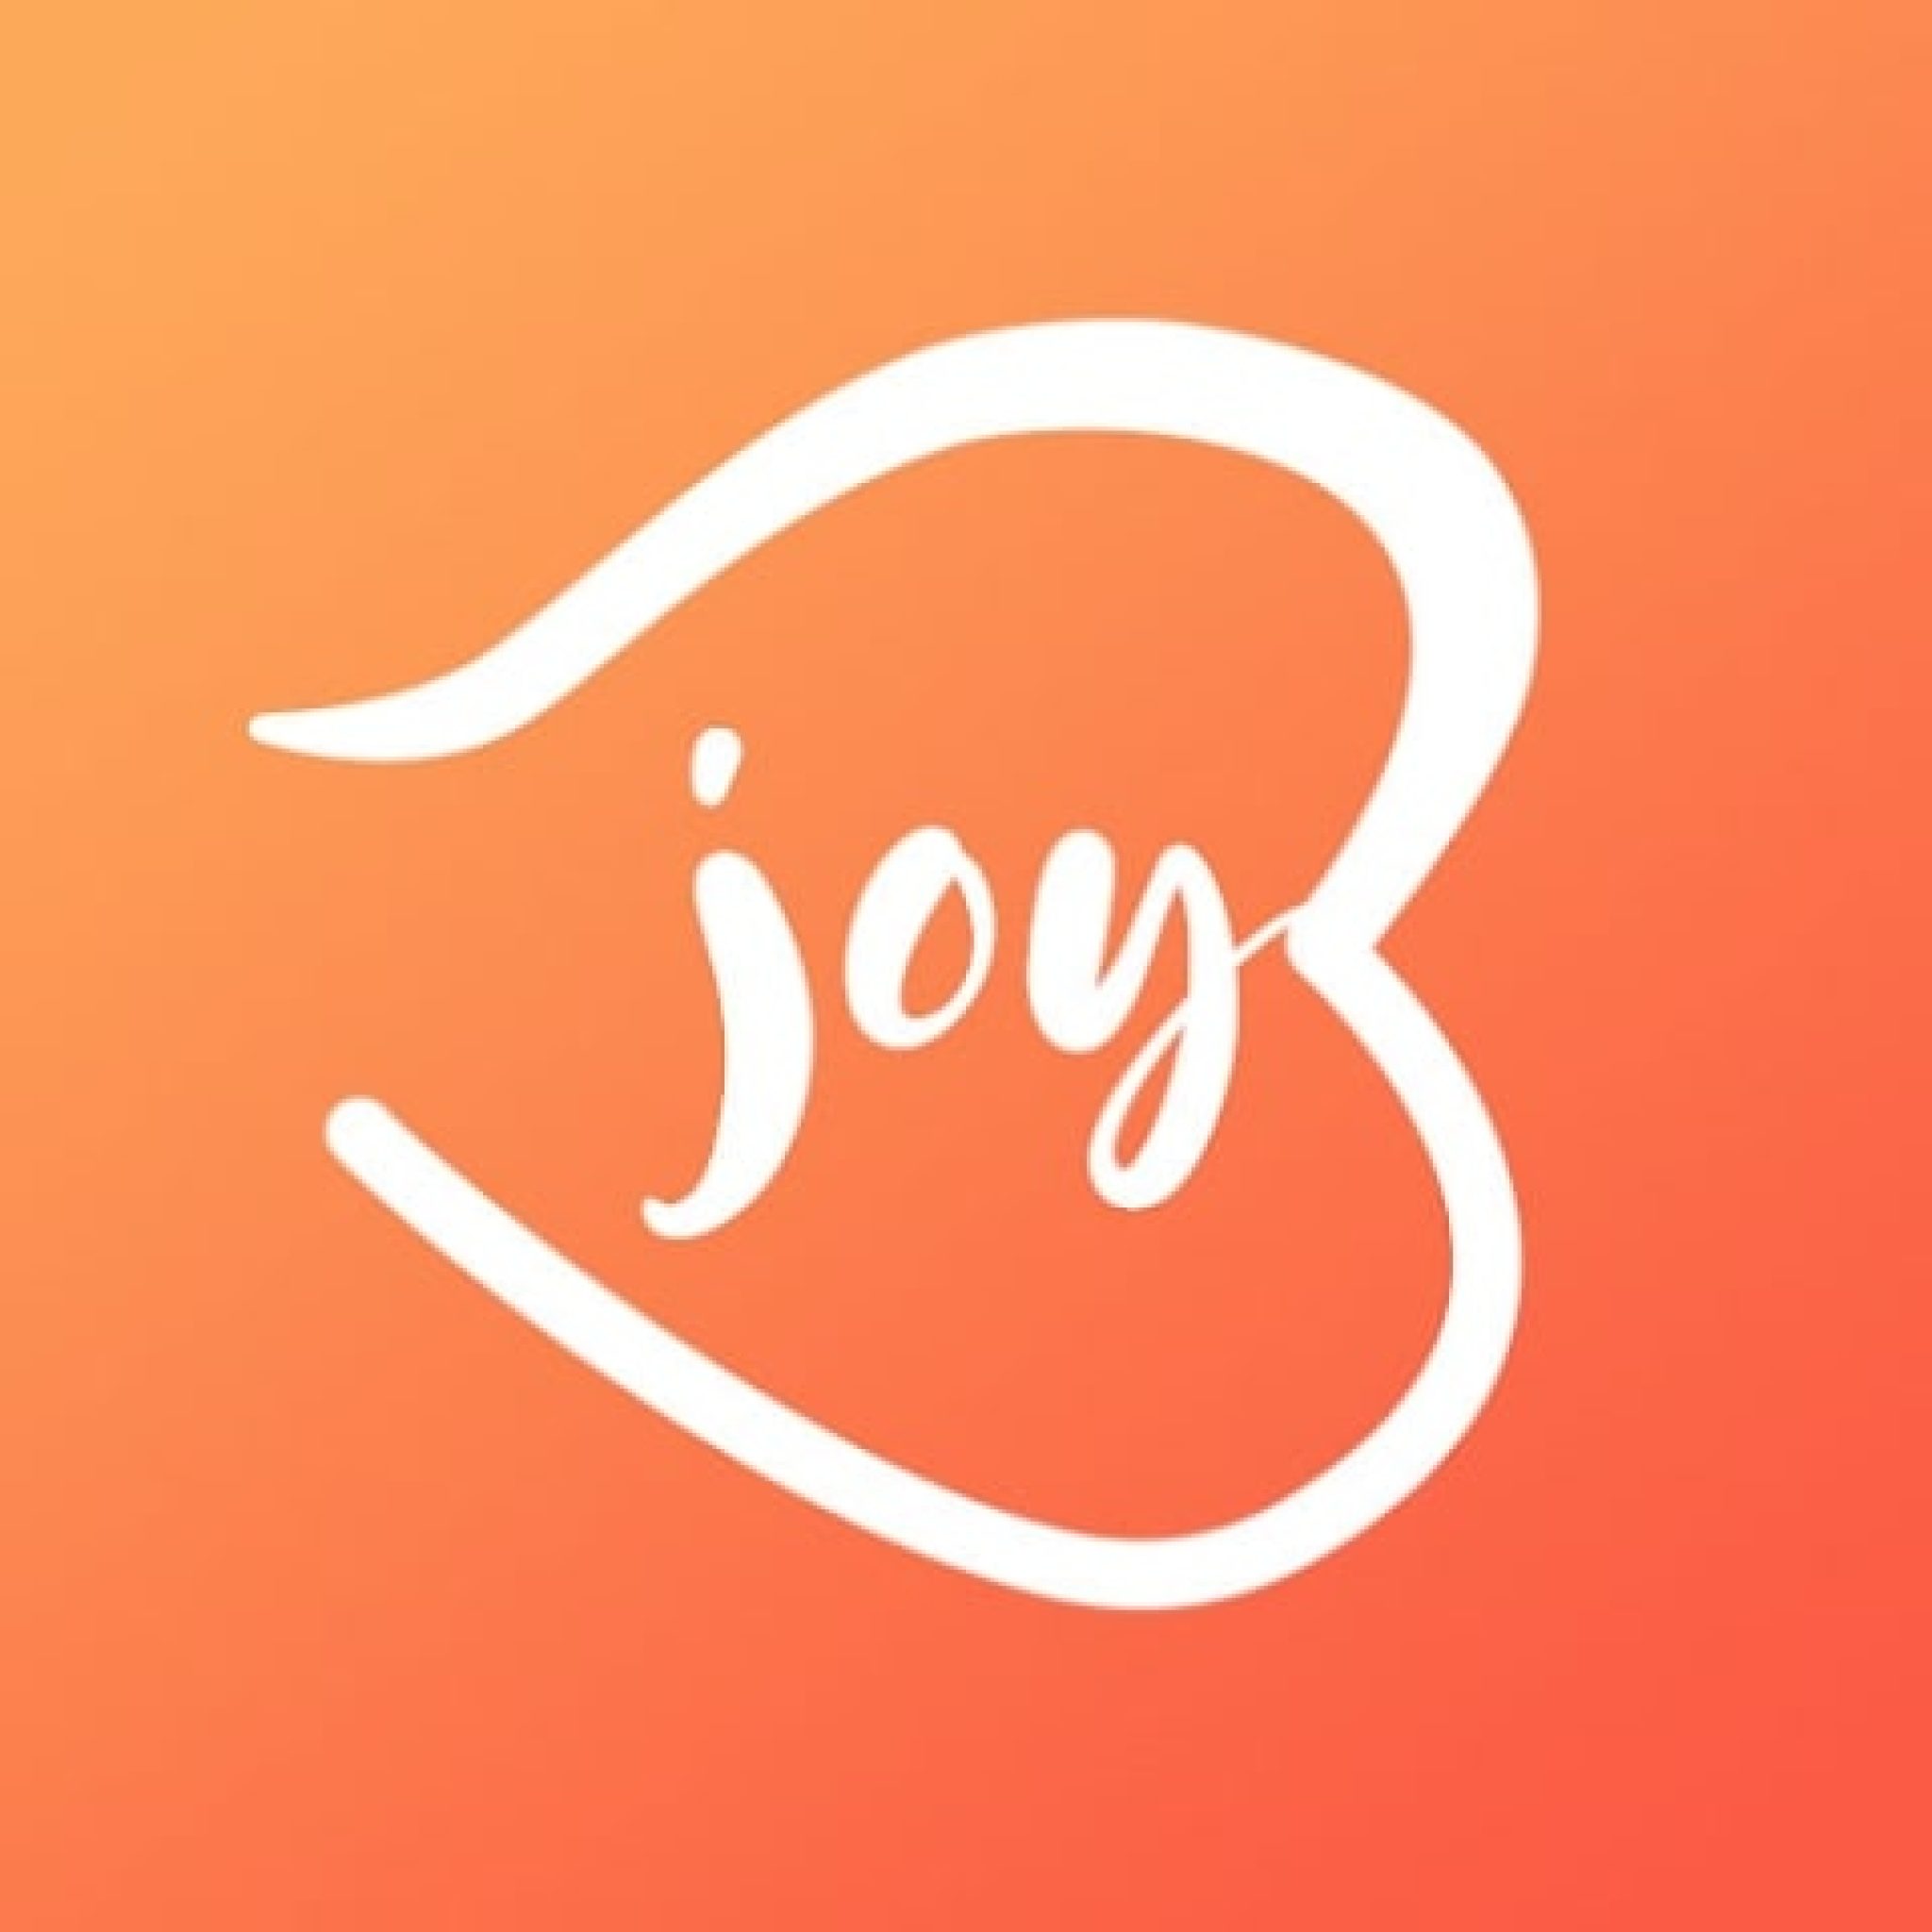 The 3joy app is designed for dating. 